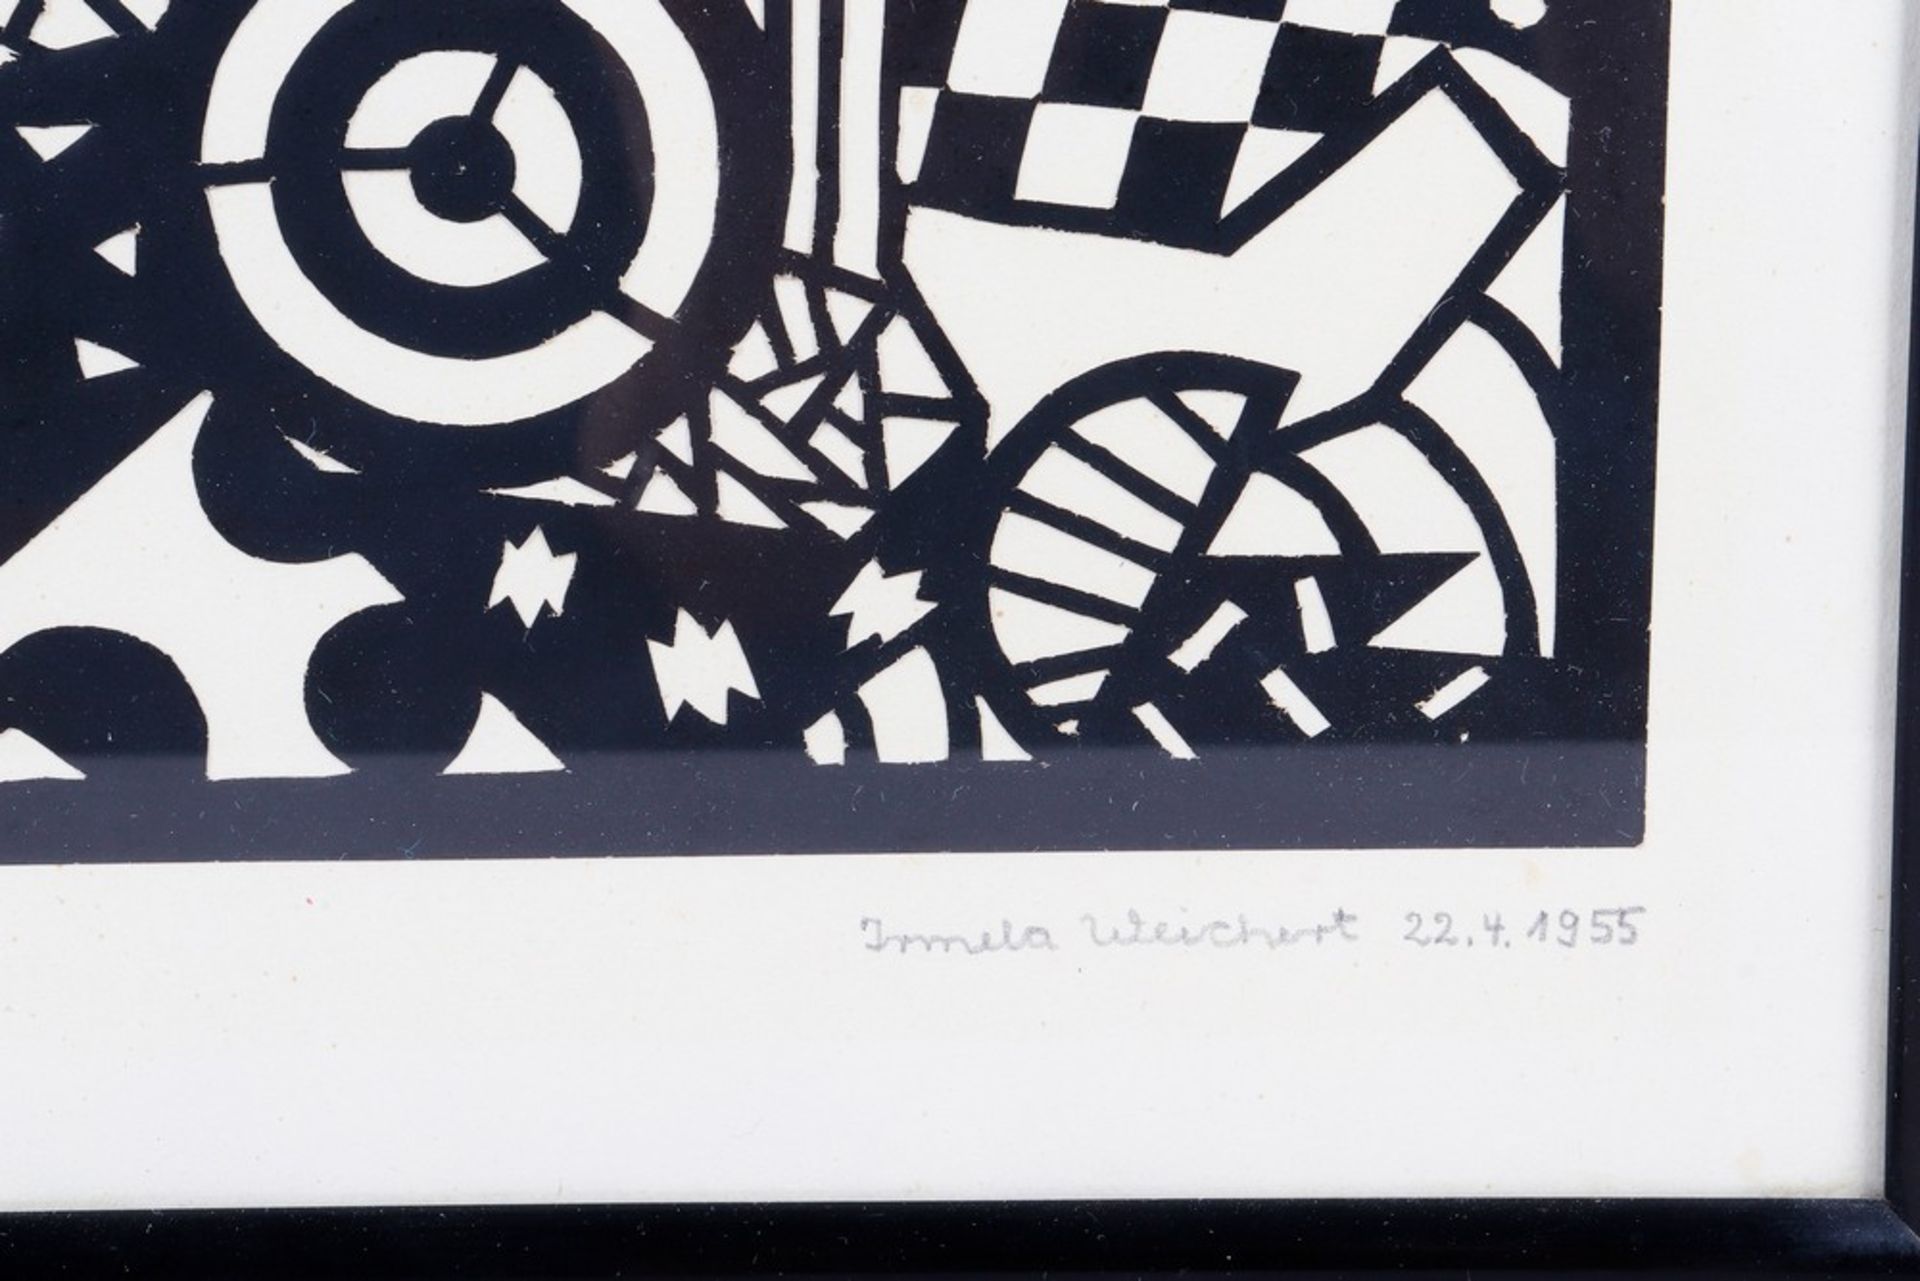 Abstract paper cut, German, c. 1955 - Image 3 of 3